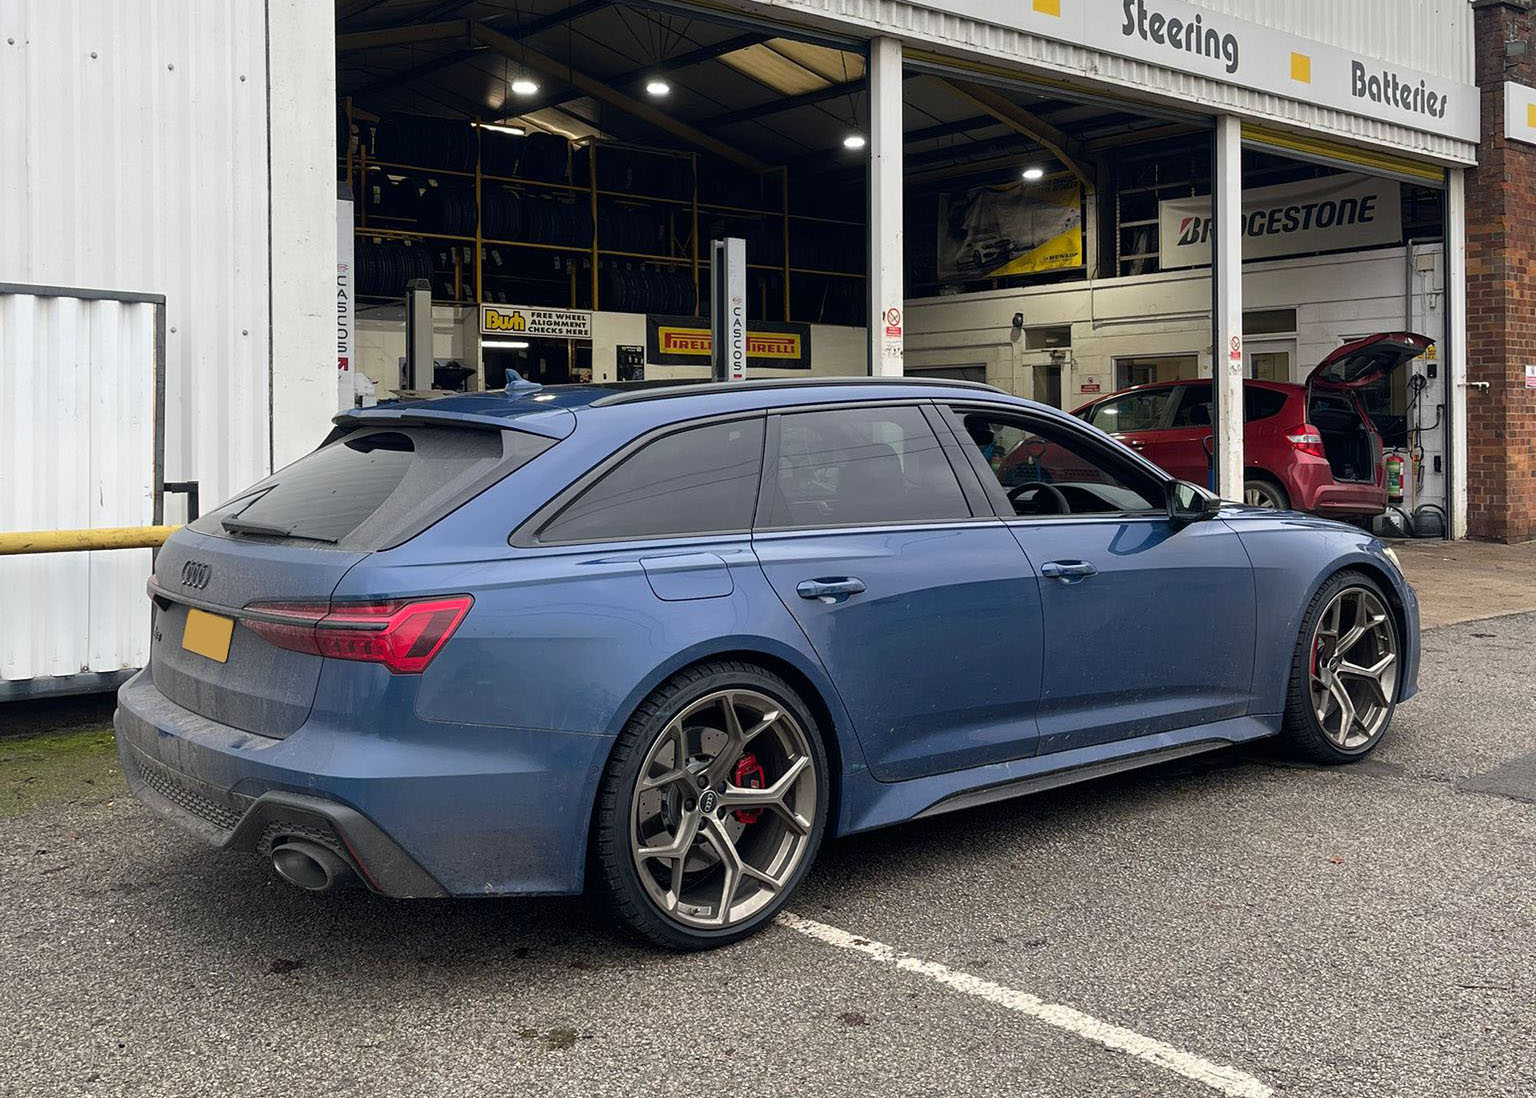 A Ascari Blue RS6 Avant, Performance Carbon Vorsprung, visited Bush Tyres in Horncastle for a full set of Pirelli P ZERO Winter AO Tyres. Fitted with colour matching Neodymium Gold balance weights for the attention to detail by the team.